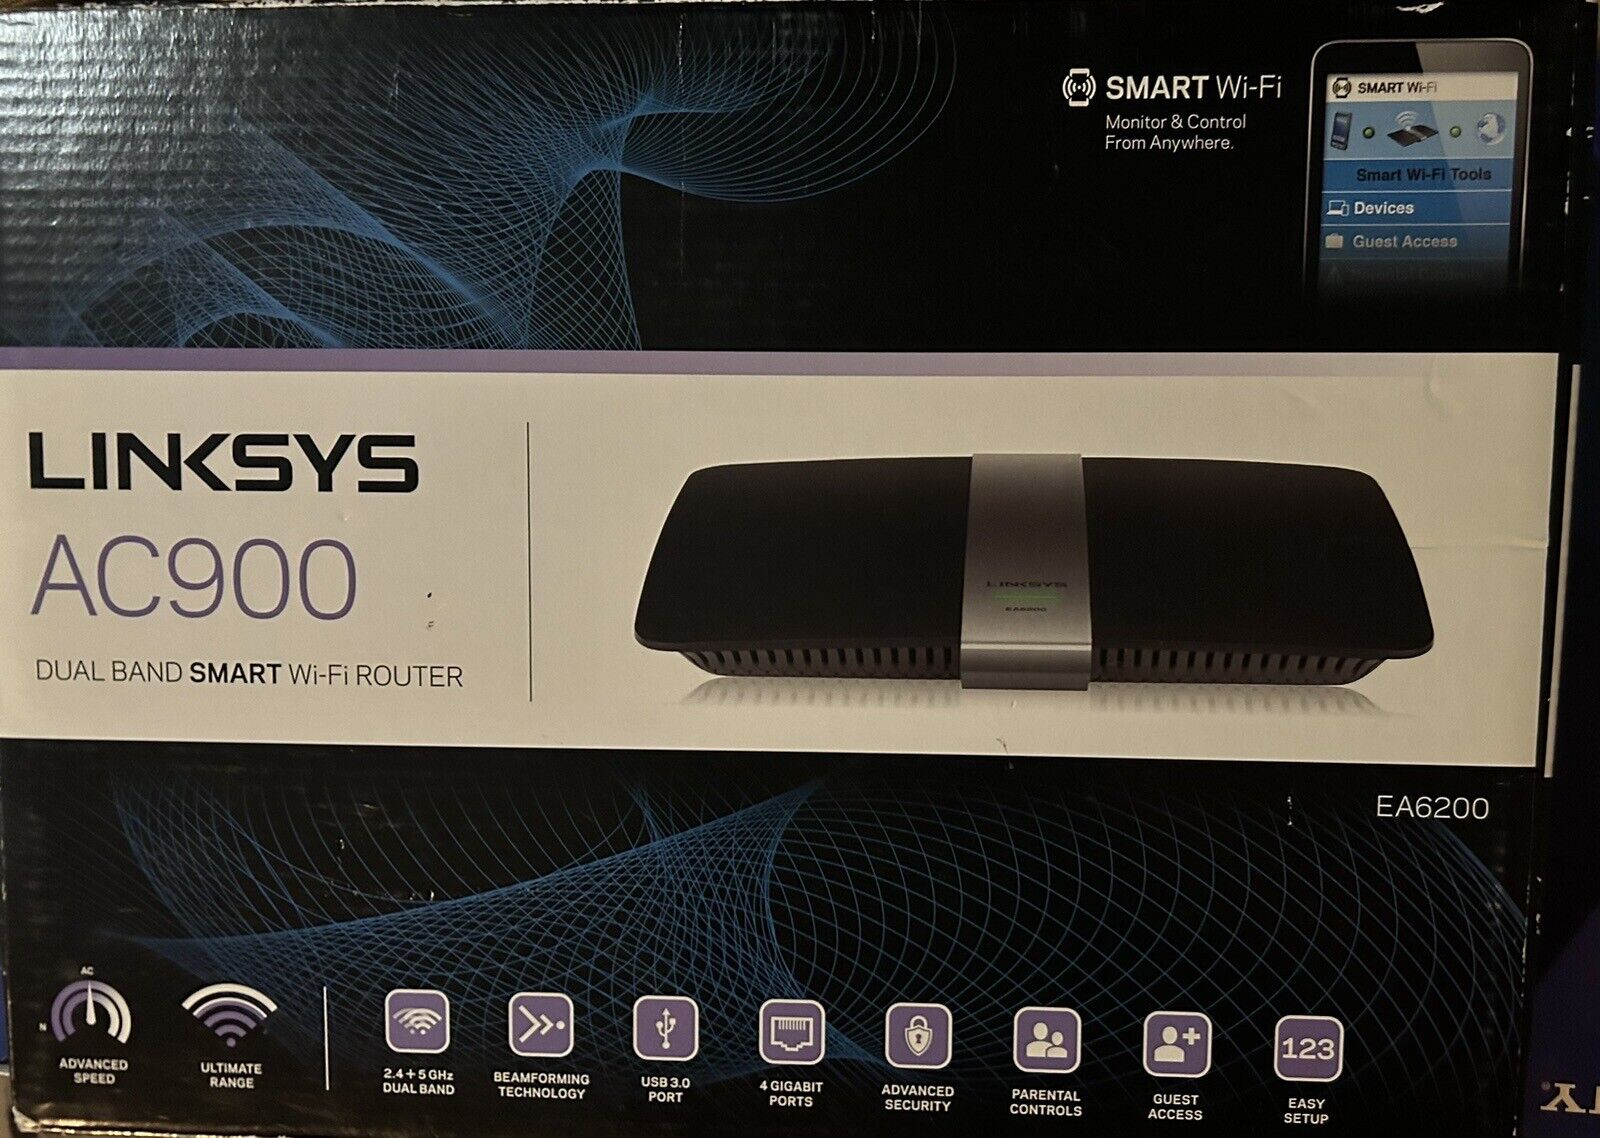 Linksys AC900 Dual Band Smart Wi-Fi Router For Streaming And Video